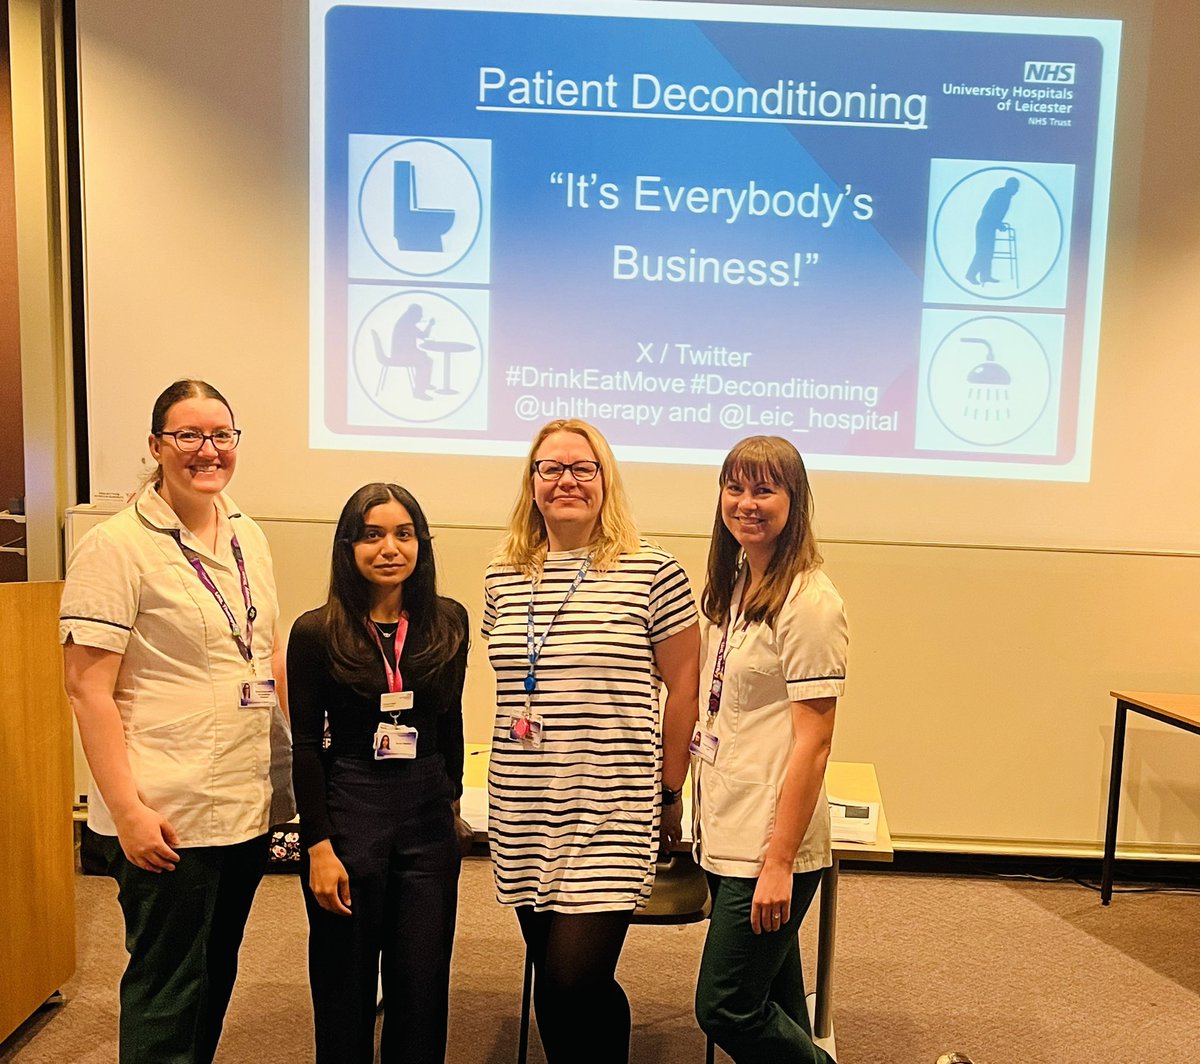 Second #Deconditioning training this morning at @Leic_hospital #LGH. Thanks to @KerryTebbutt, #TrivainiDietician and #JenniOT from @uhltherapy for supporting this MDT approach. #DrinkEatMove #DrEaM